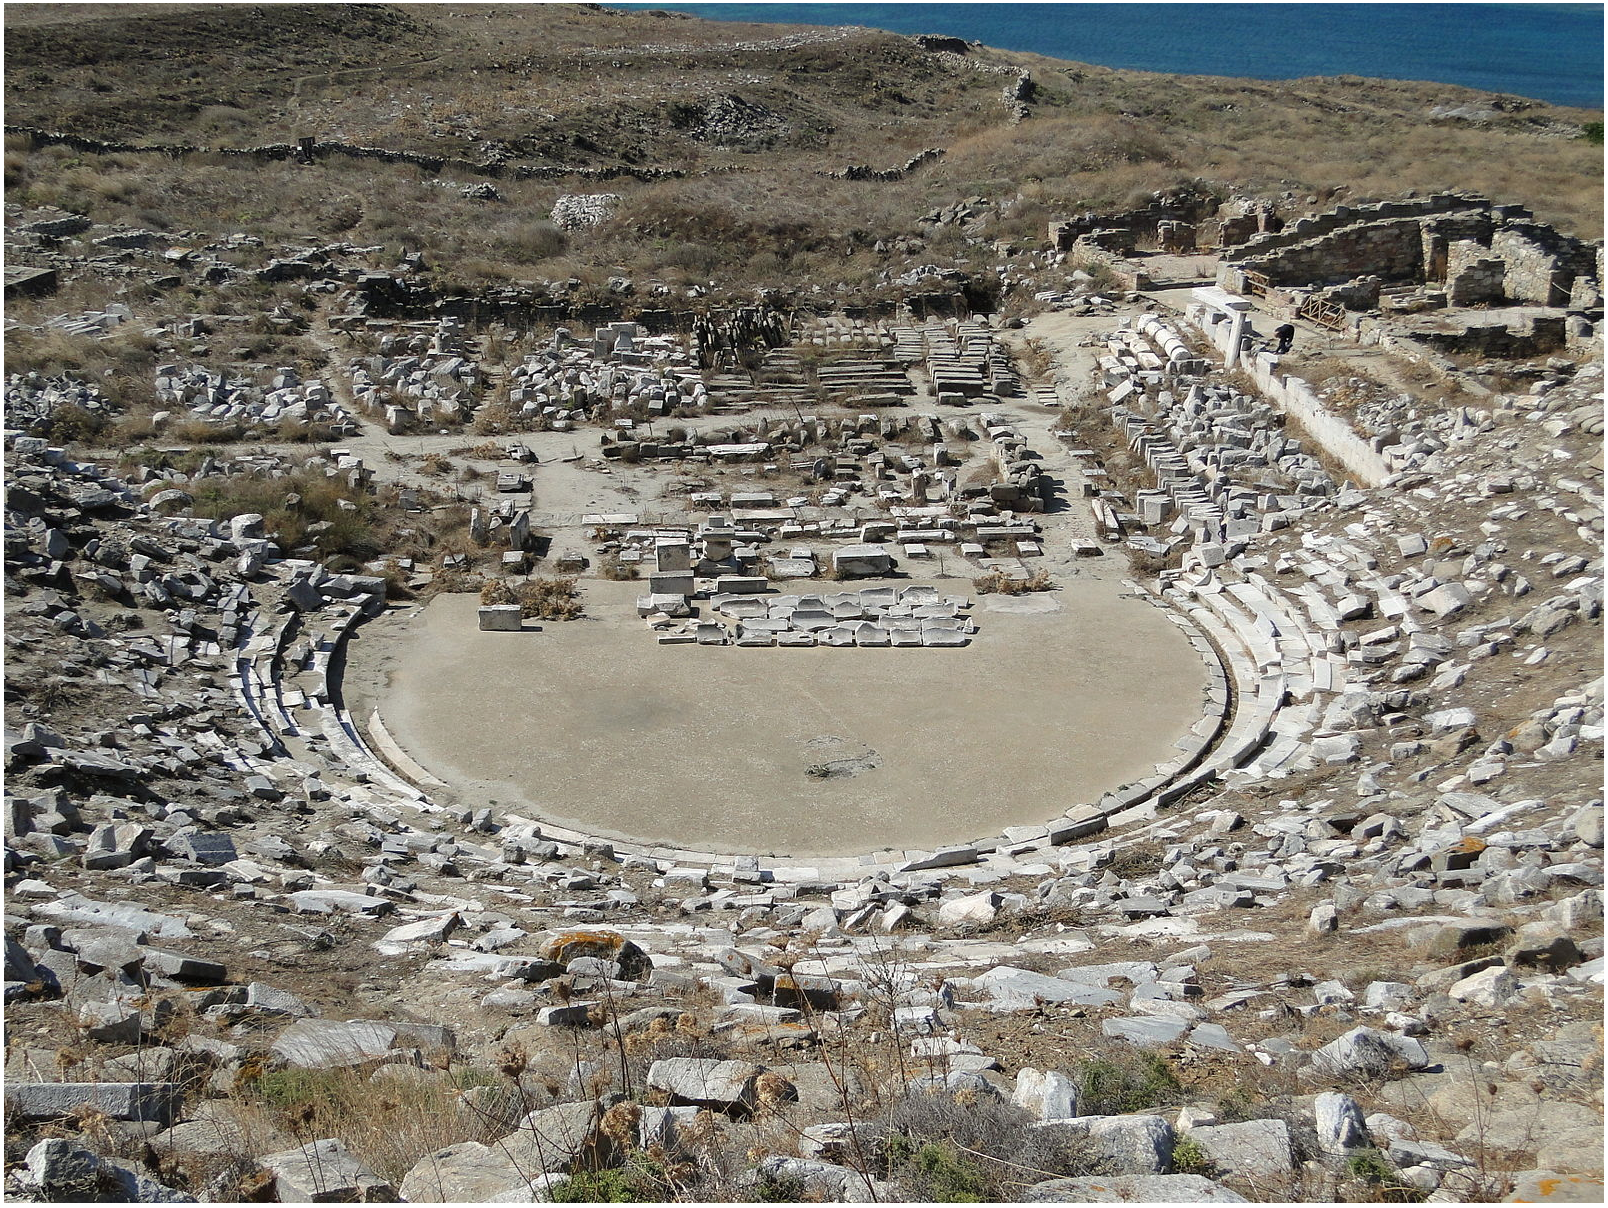 Delos – demonstrations/competitions for the god